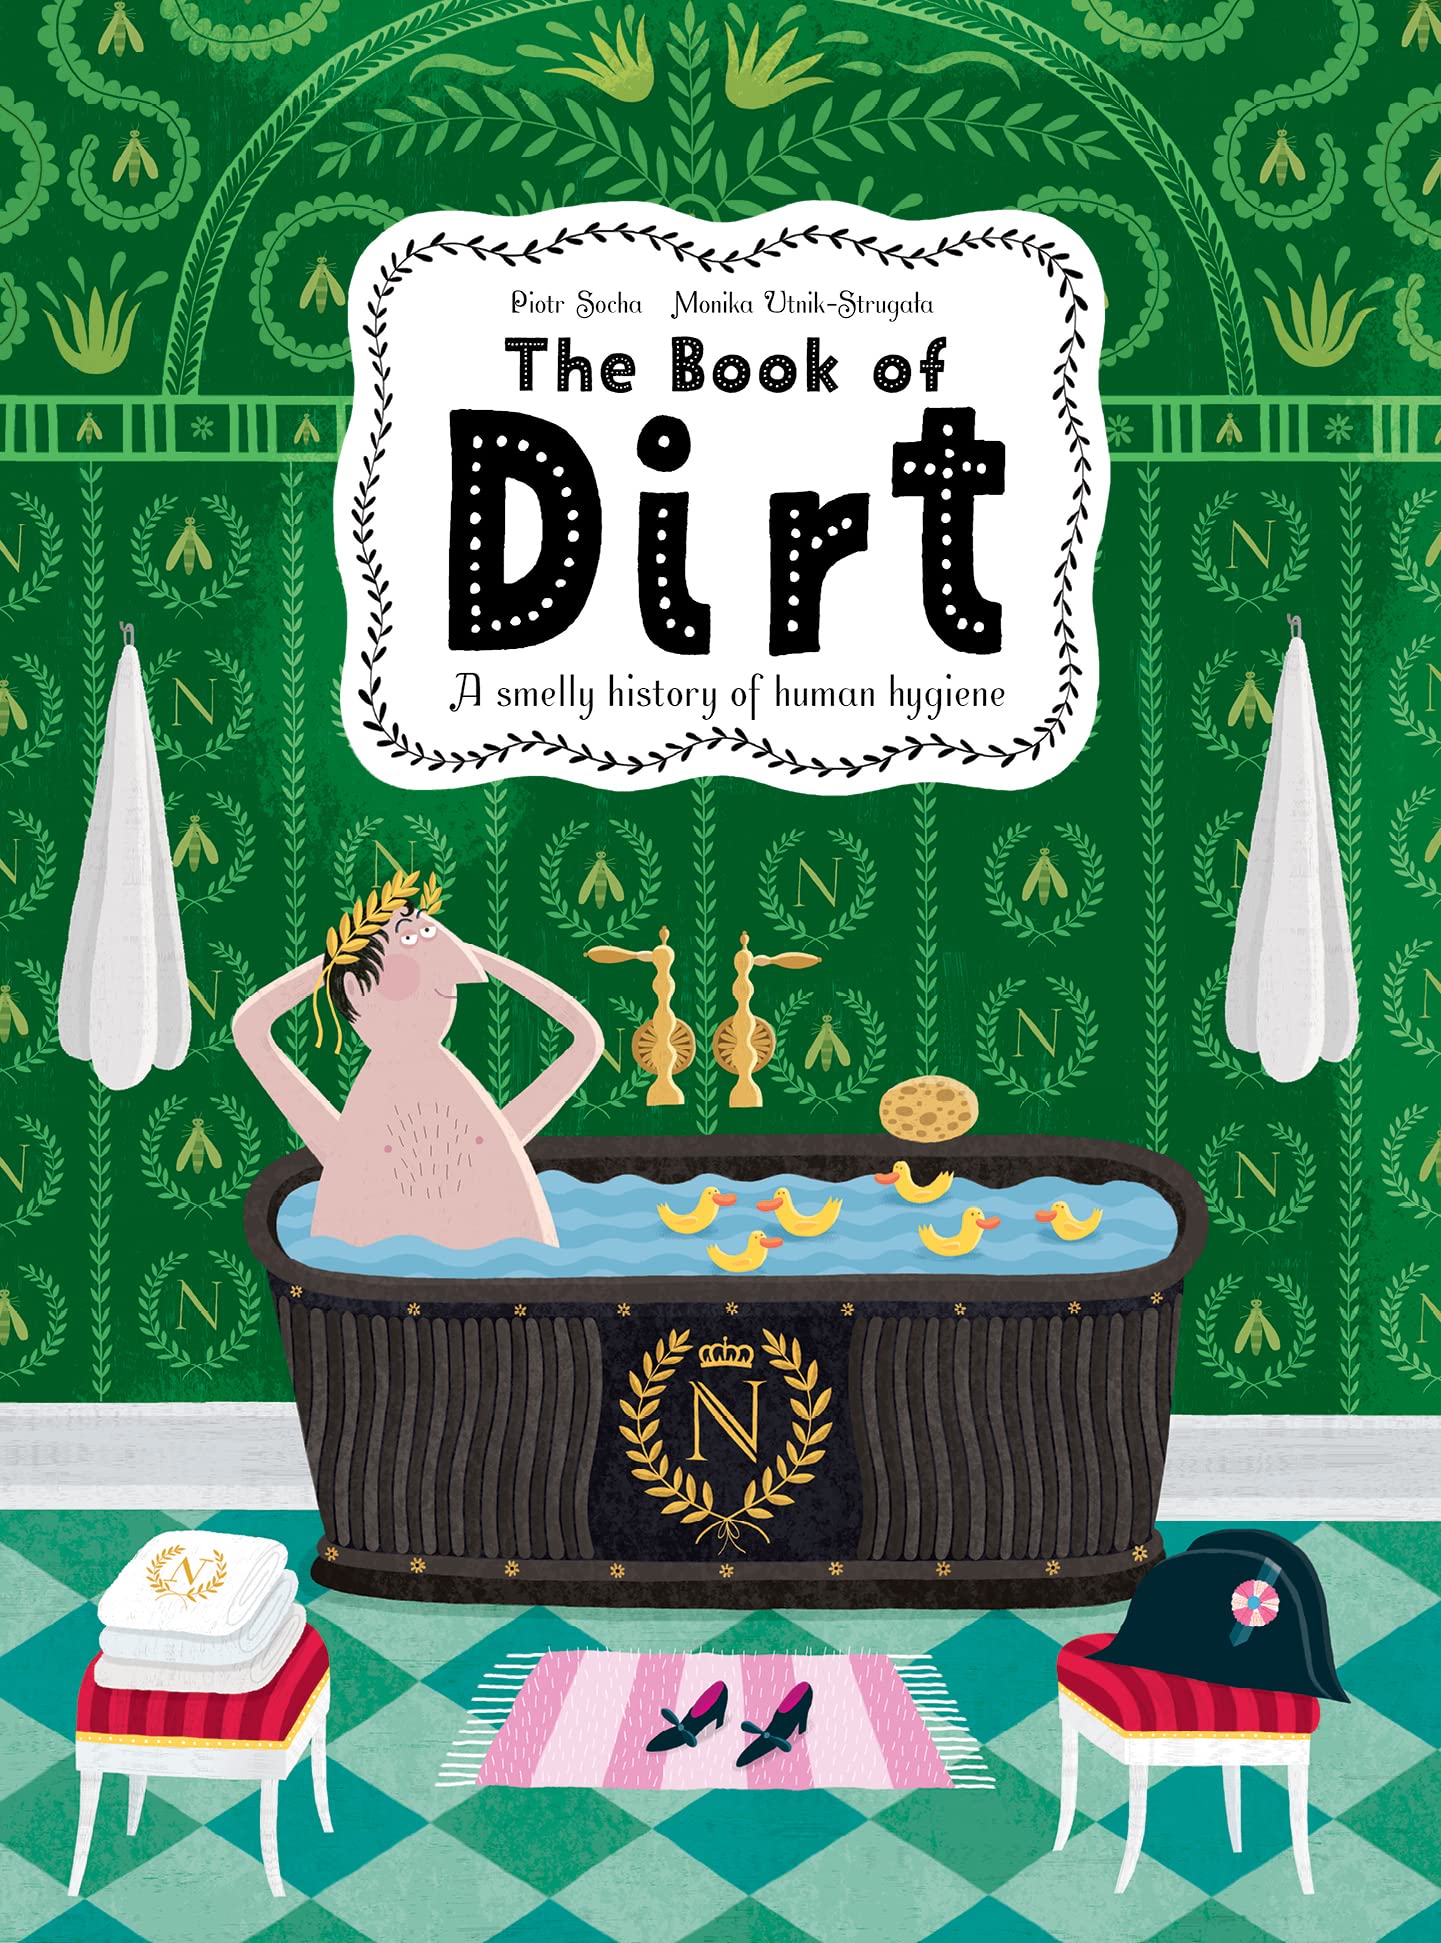 The Book Of Dirt